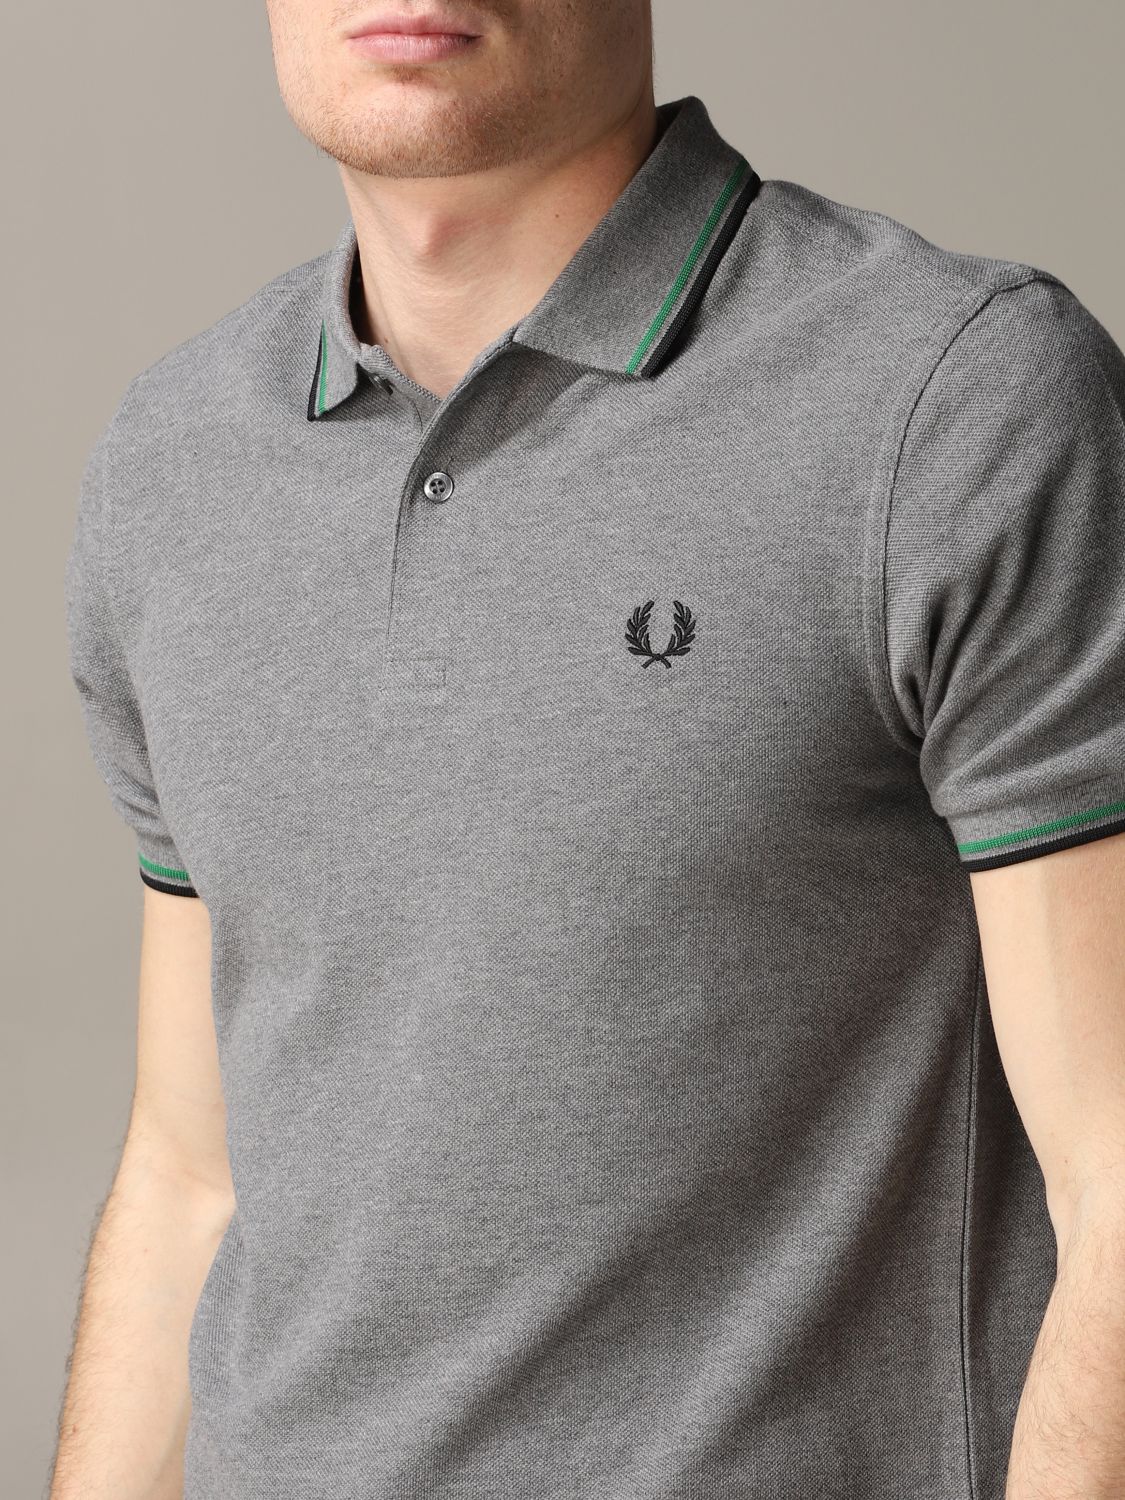 T-shirt men Fred Perry | Polo Shirt Fred Perry Men Grey | Polo Shirt ...